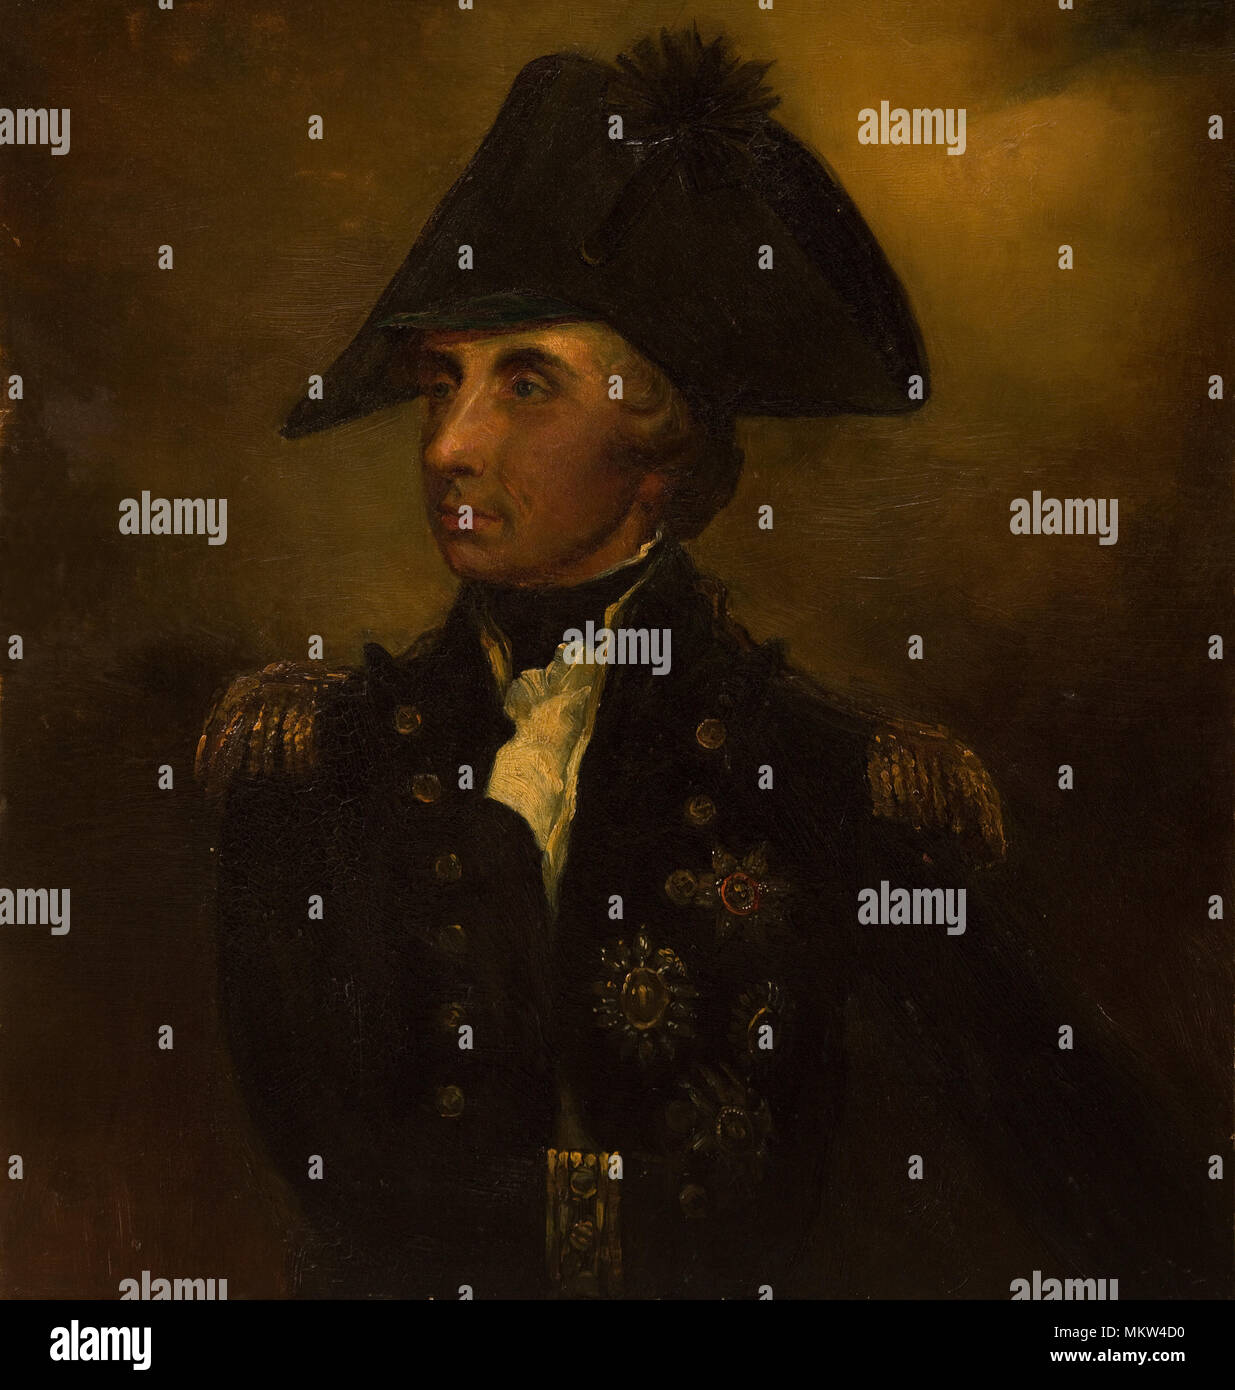 Admiral lord nelson oil painting Stock Photo